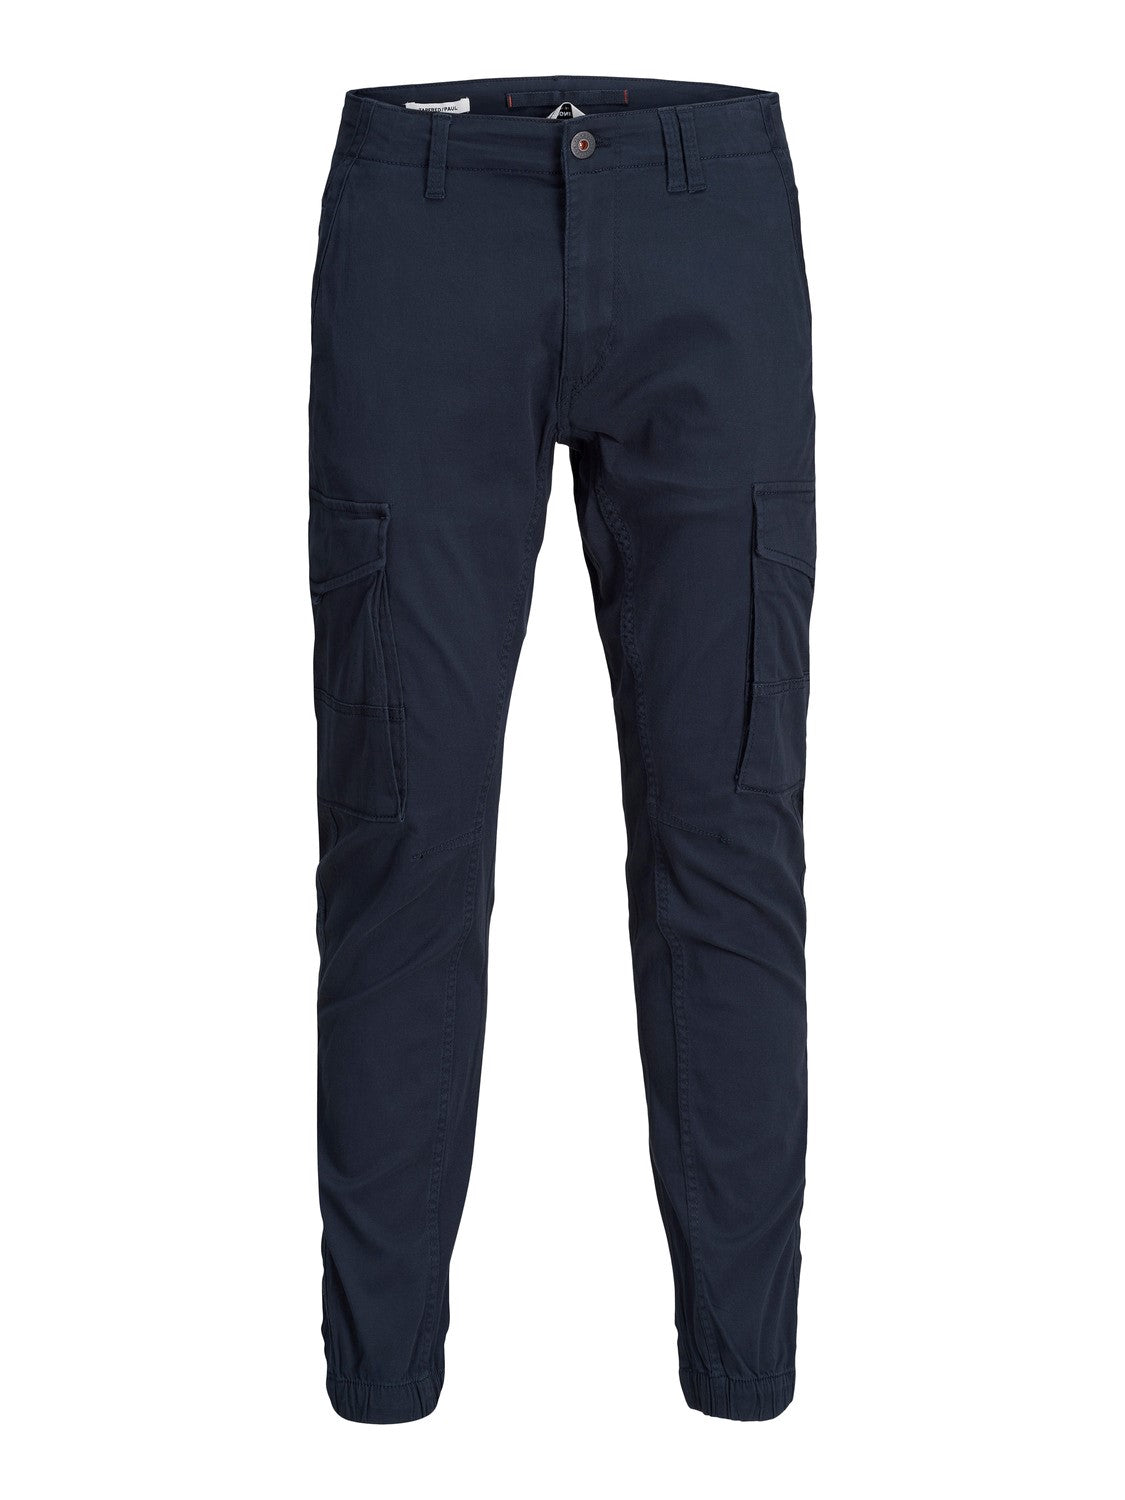 Paul Flake Navy Cargo Pant-Front view